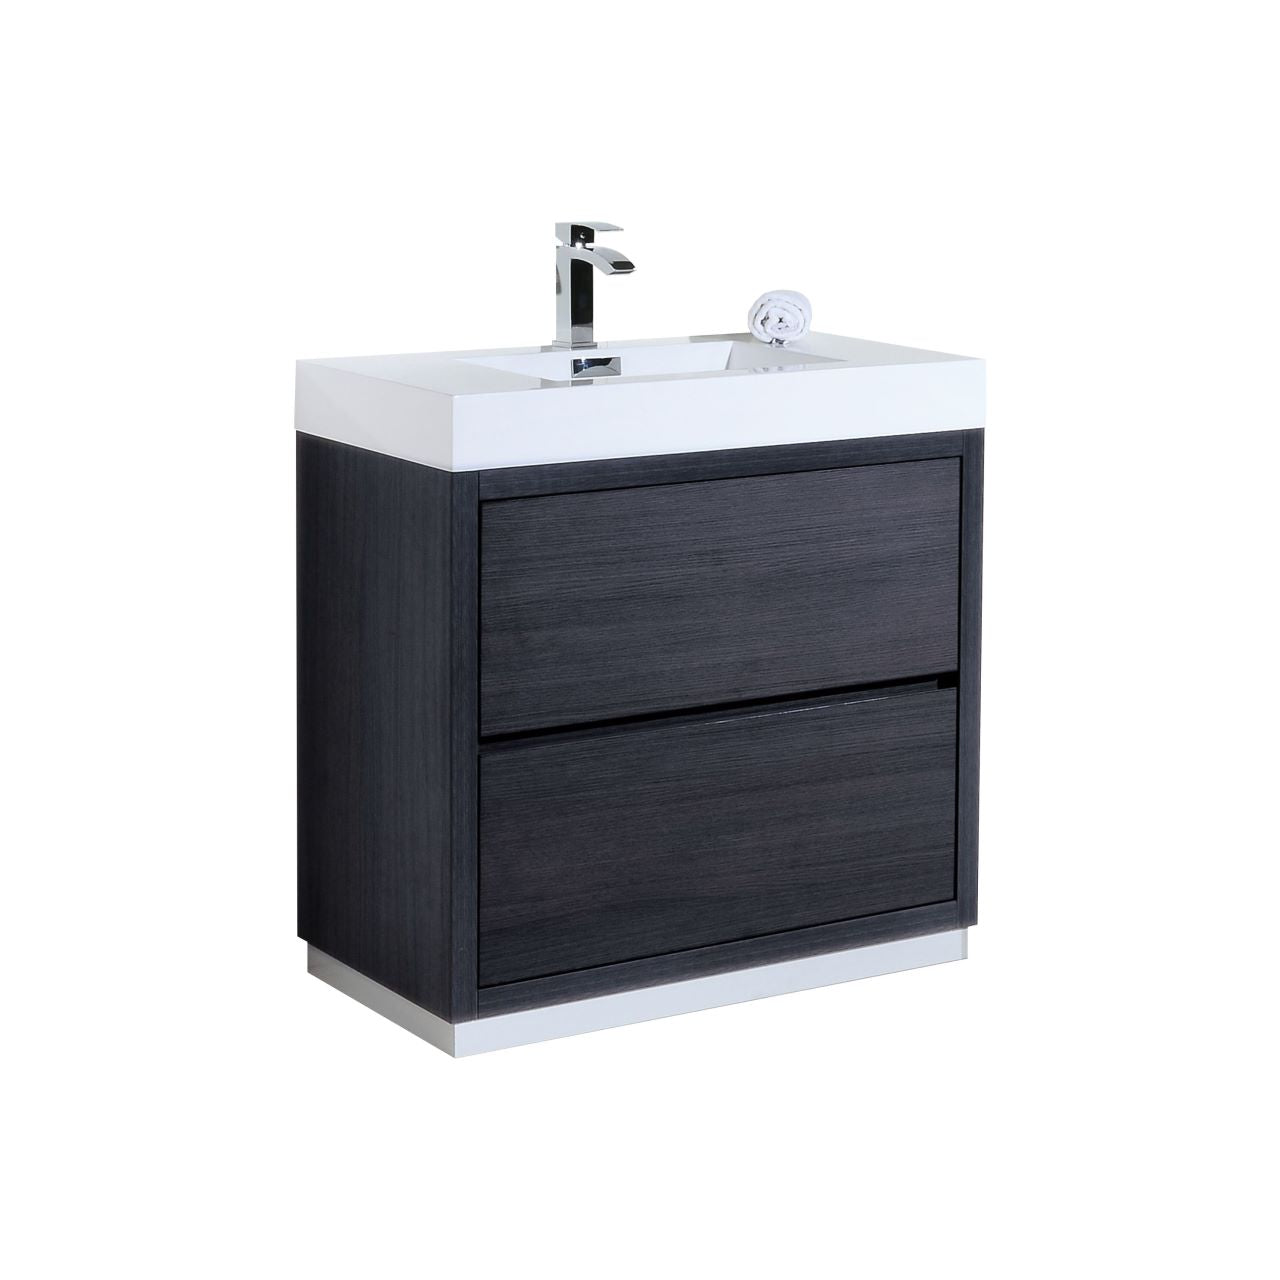 KUBEBATH Bliss FMB36-GO 36" Single Bathroom Vanity in Gray Oak with White Acrylic Composite, Integrated Sink, Angled View